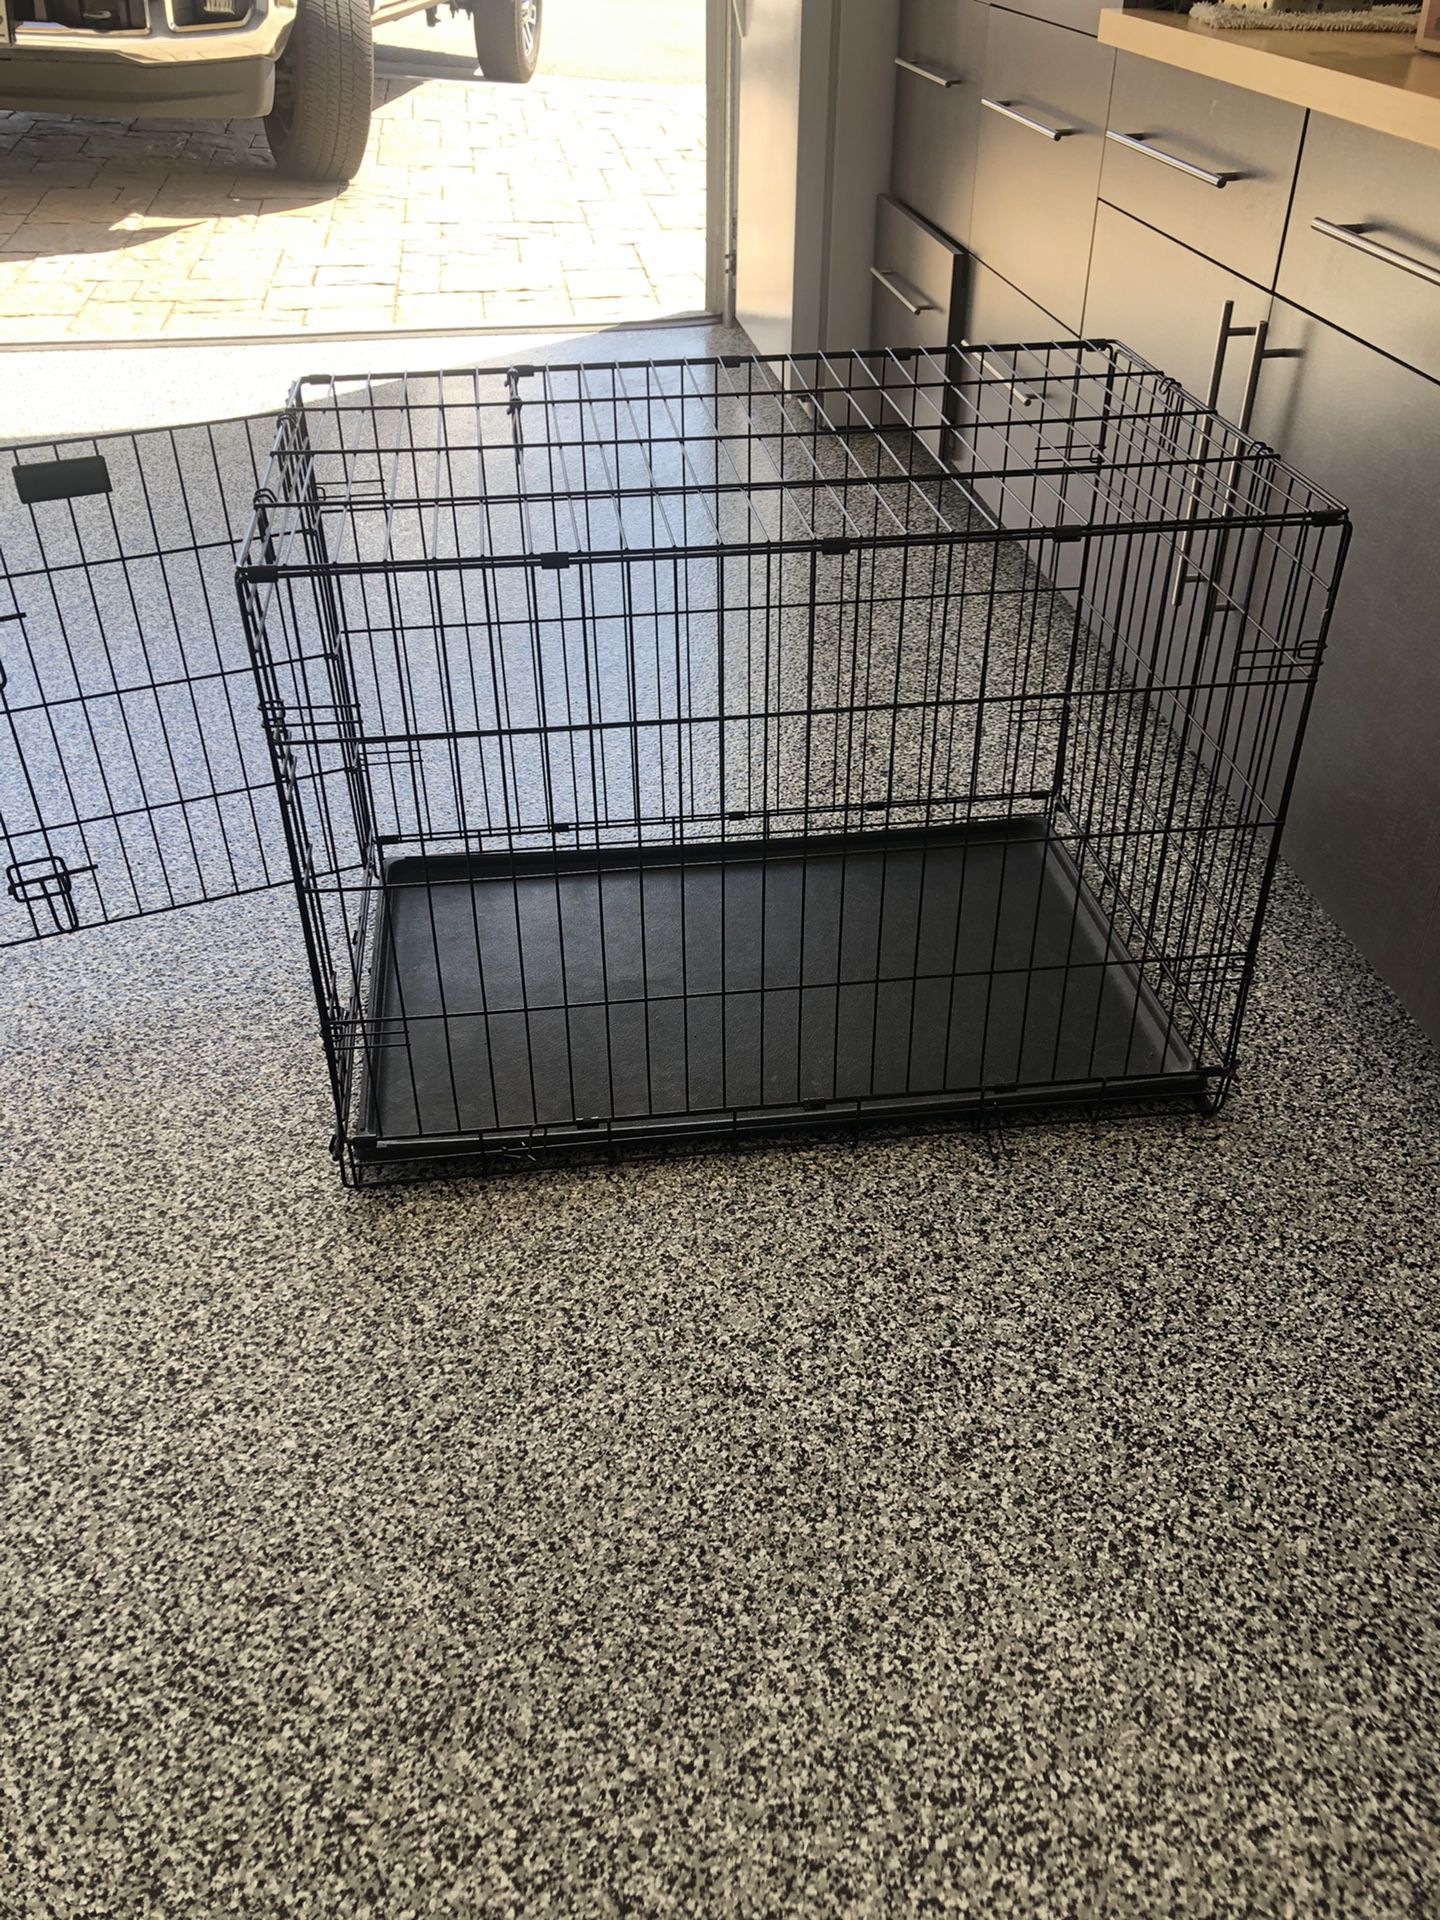 Dog crate 3x2 by 26ht